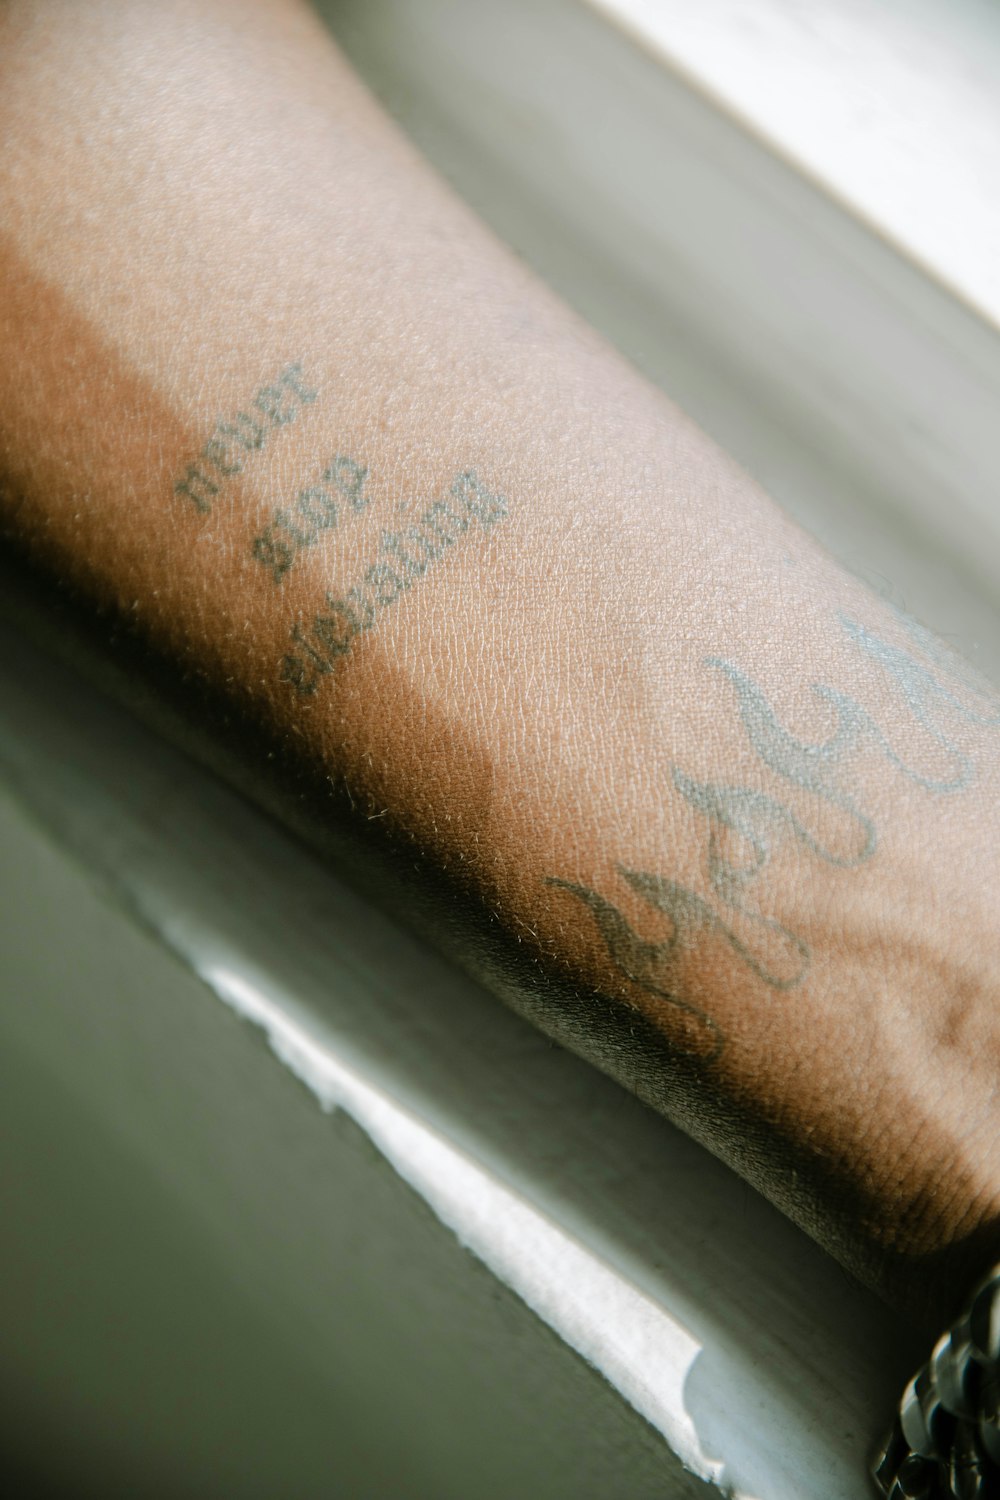 a close up of a person's arm with writing on it